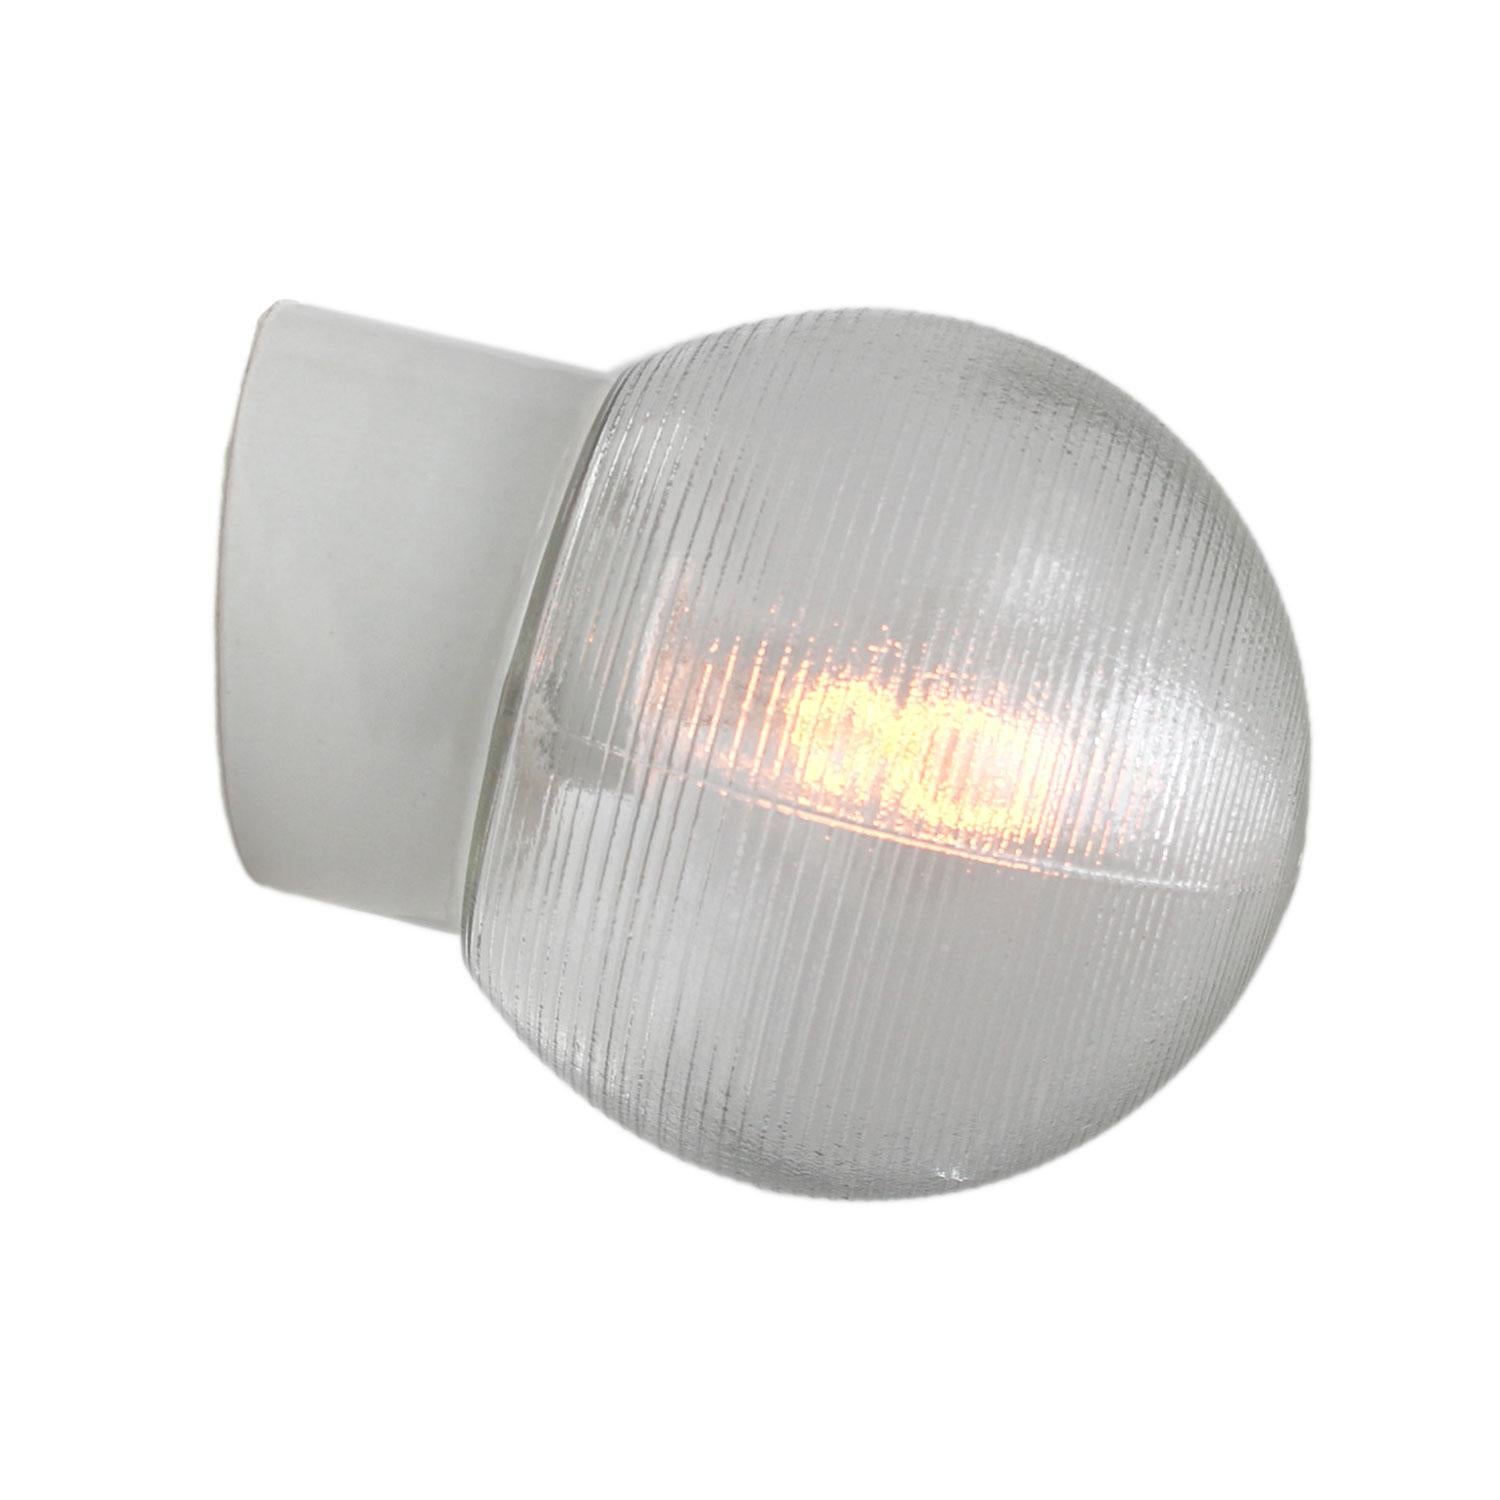 Industrial wall lamp.
White porcelain, striped glass.
2 conductors, no ground.

Weight: 0.90 kg / 2 lb

Priced per individual item. All lamps have been made suitable by international standards for incandescent light bulbs, energy-efficient and LED